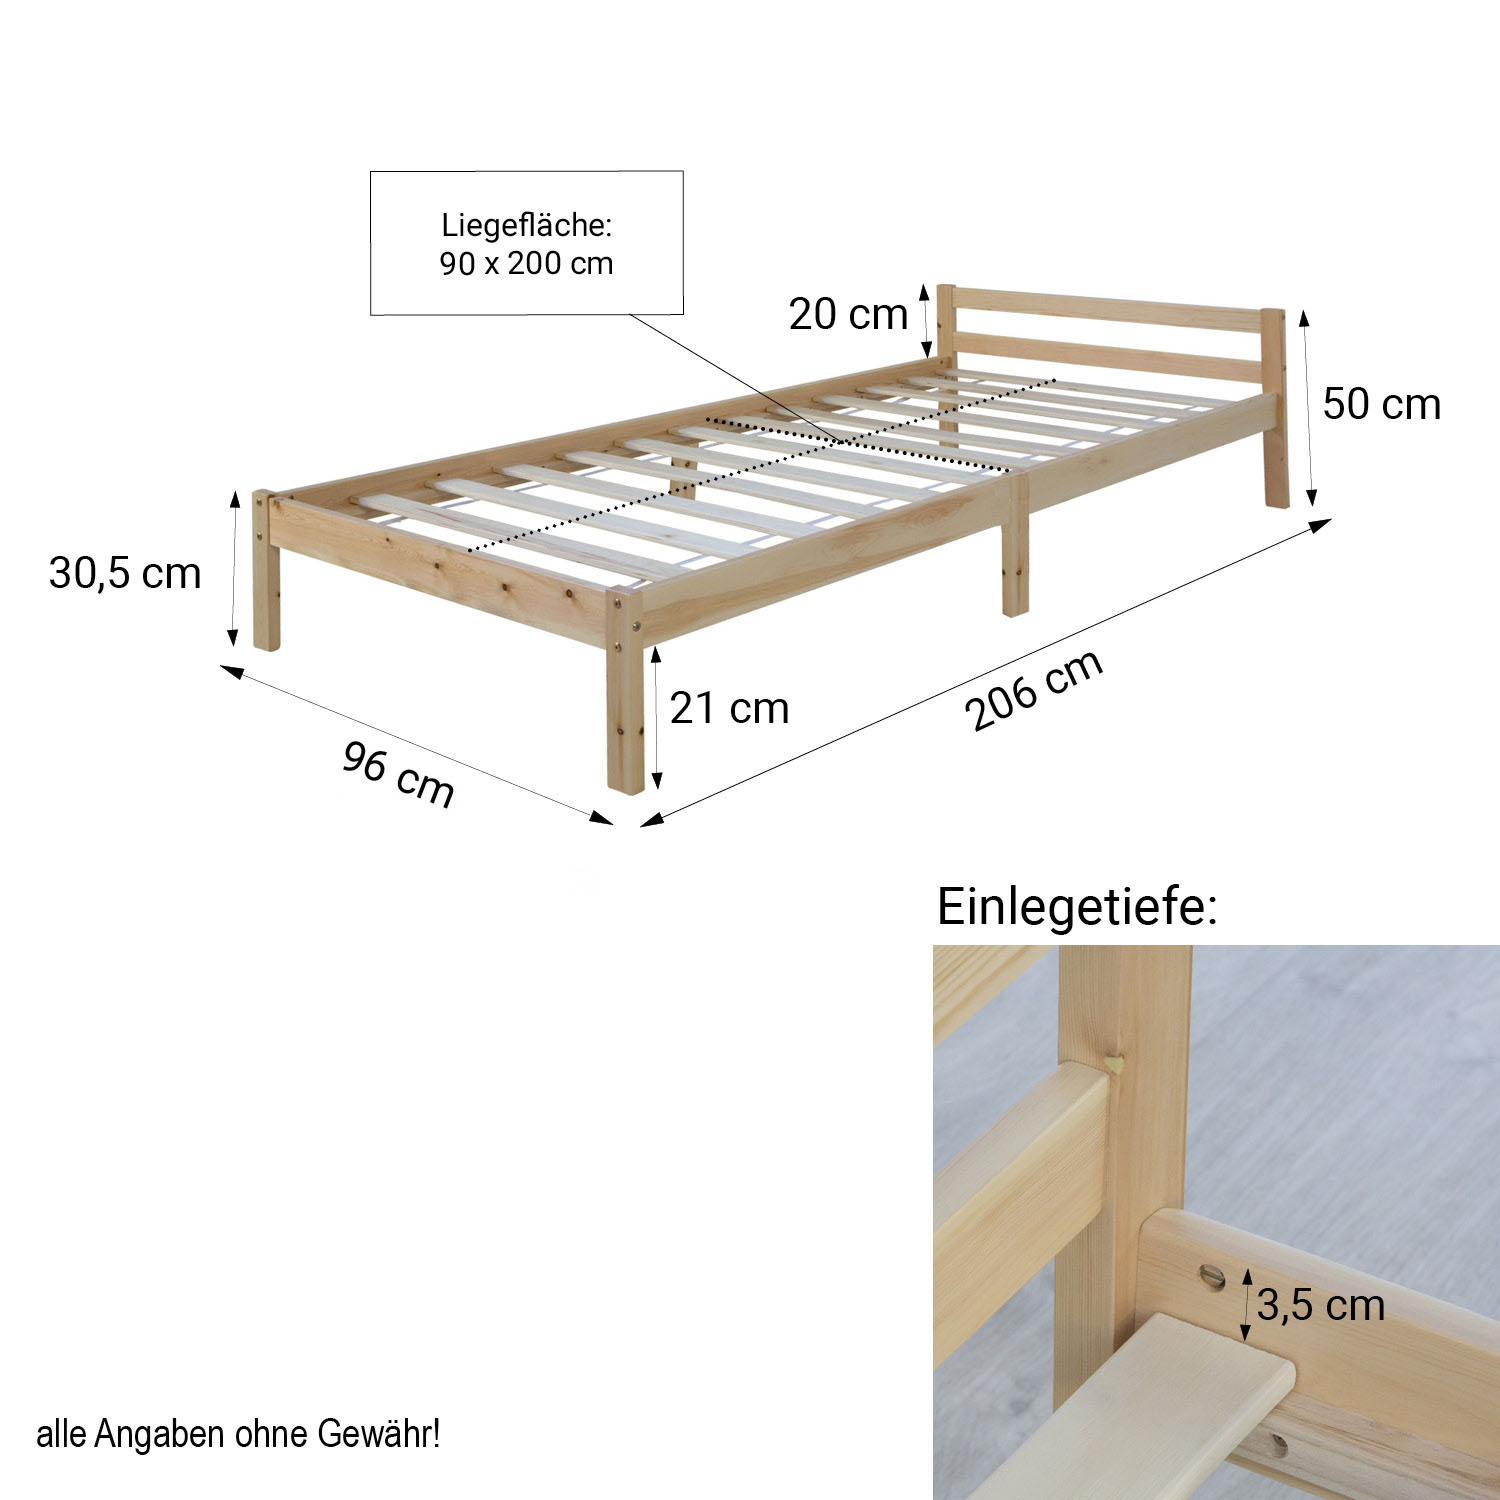 Solid wood single bed youth bed 200 x 90 nature slatted futon bed bed